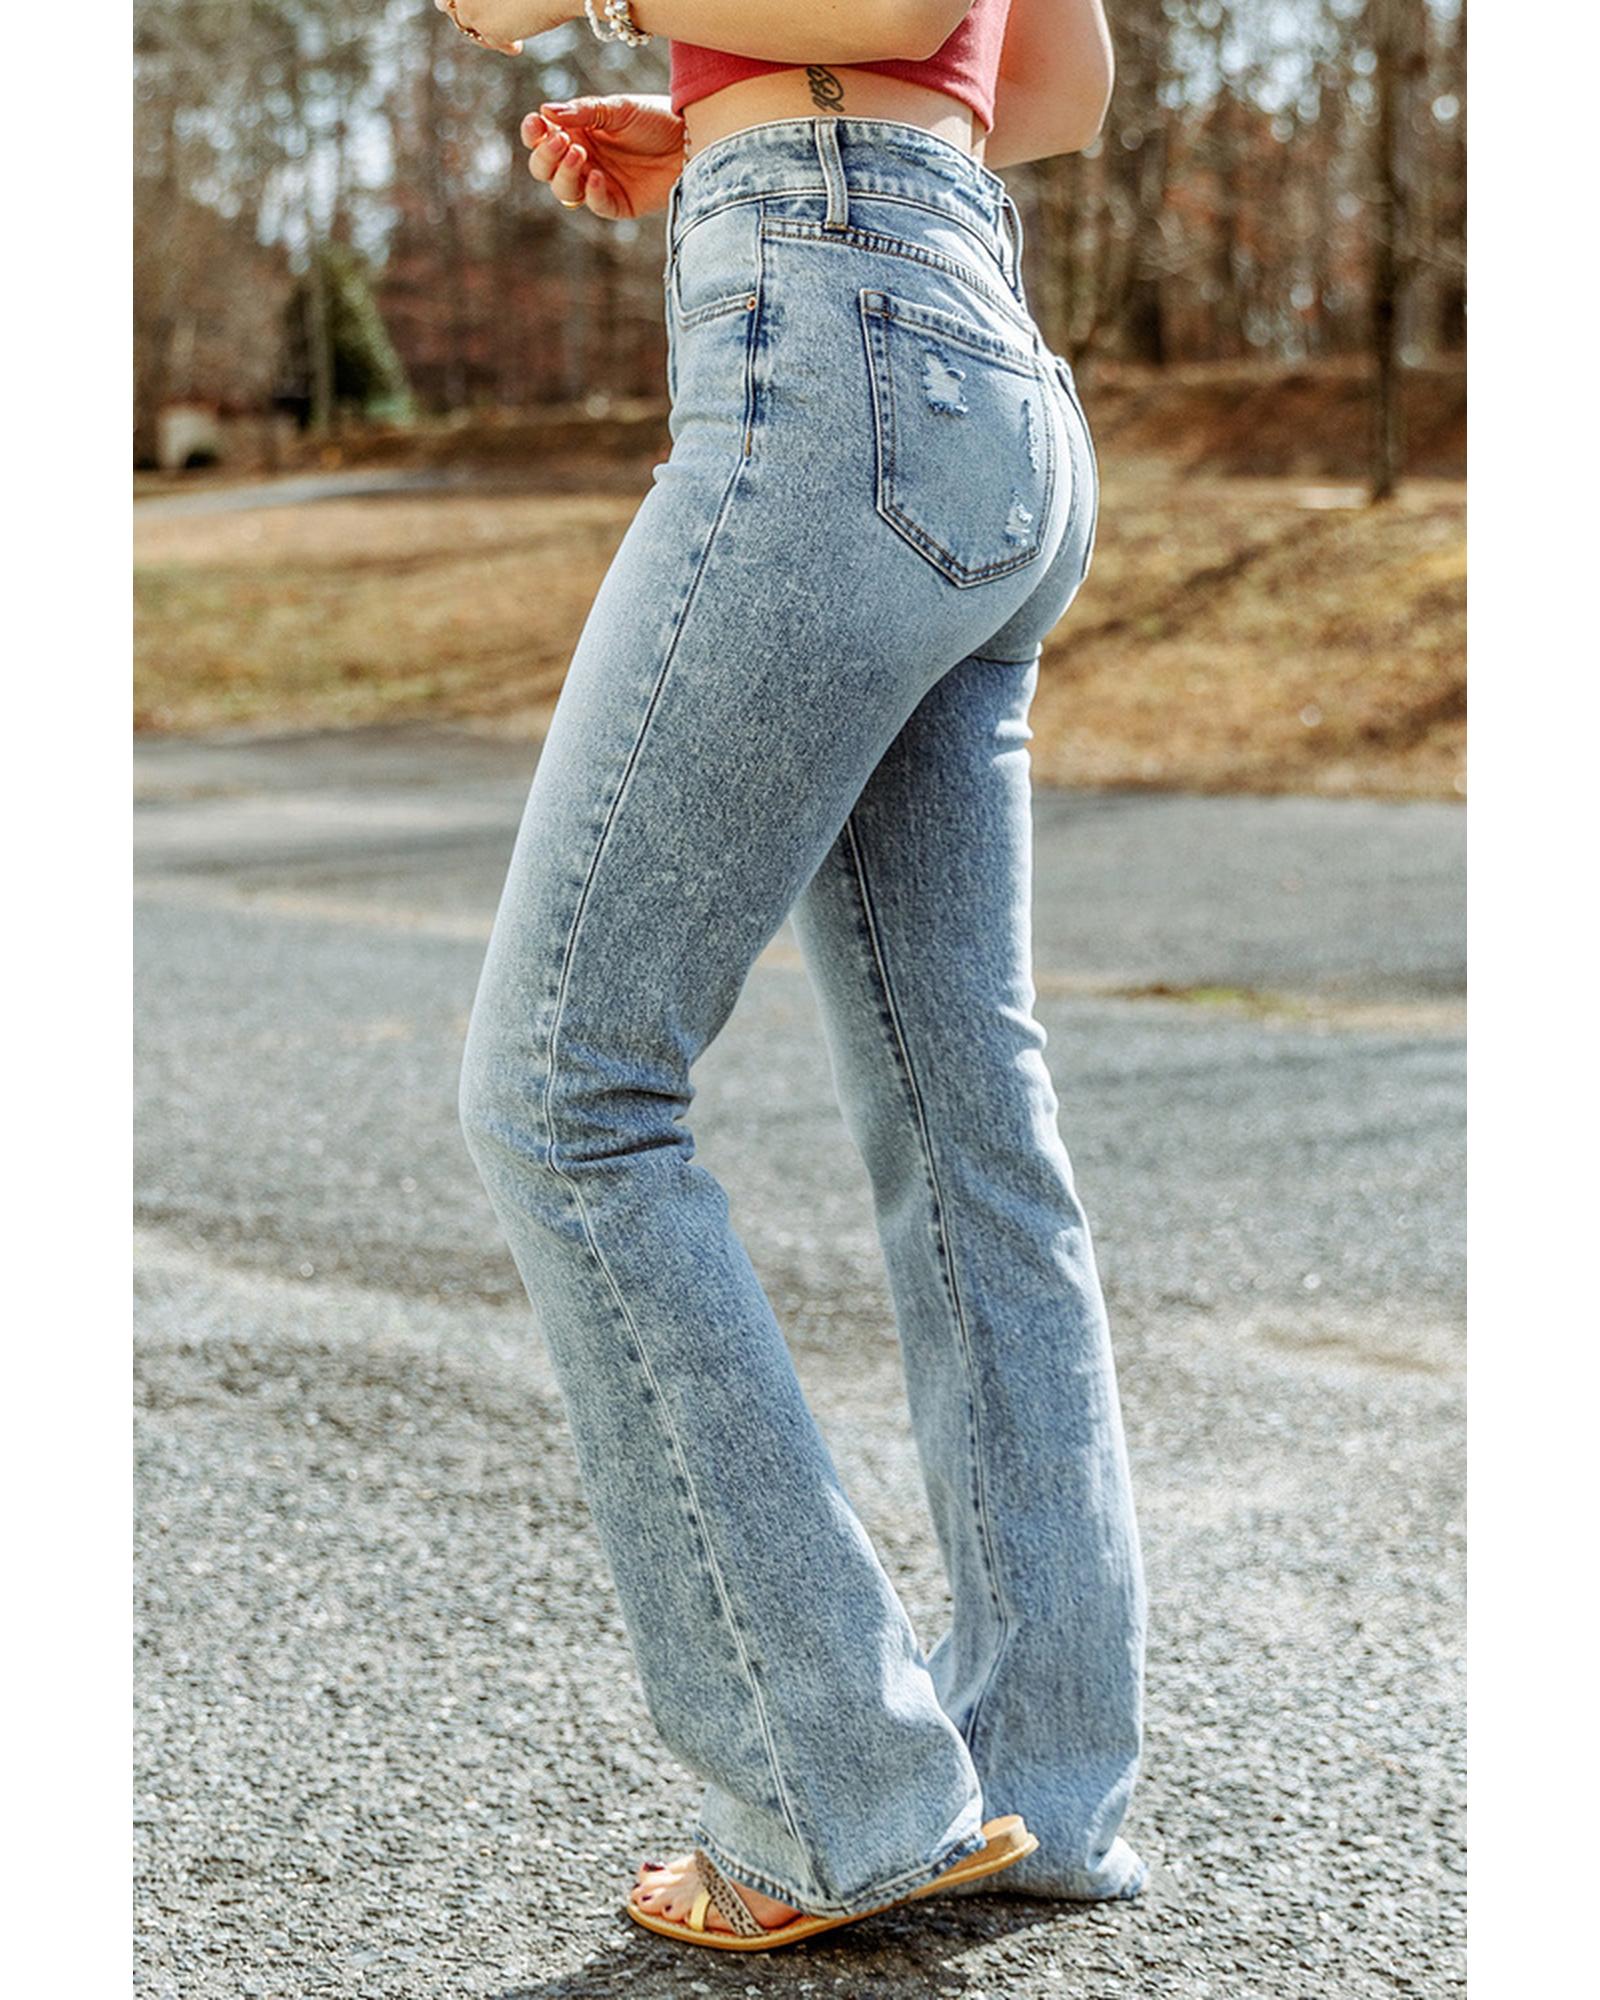 Azura Exchange Ripped Detail Flare Bottom Jeans - 10 US